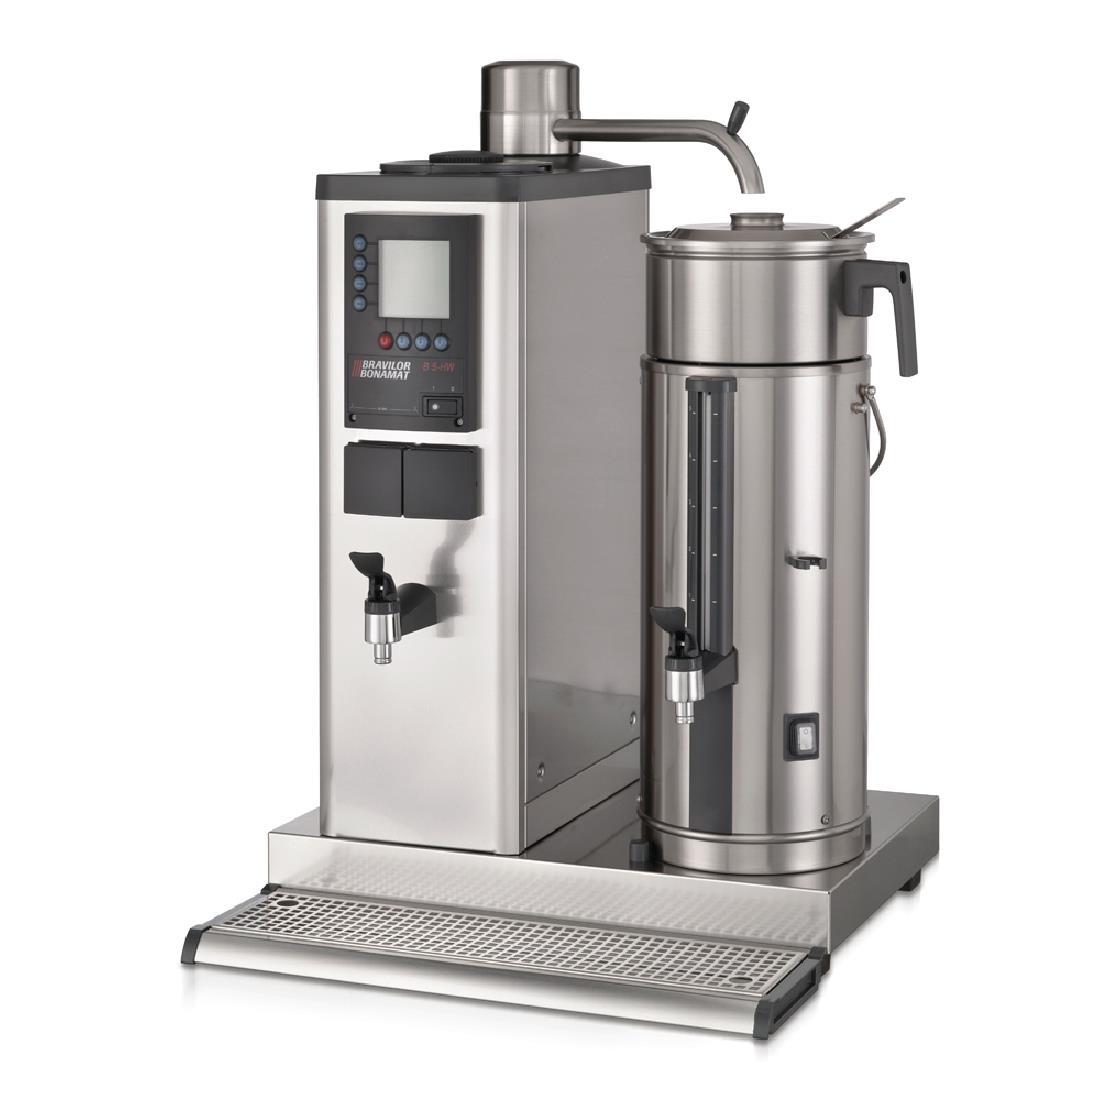 Bravilor B5 HWR Bulk Coffee Brewer with 5Ltr Coffee Urn and Hot Water Tap 3 Phase - DC686  - 1